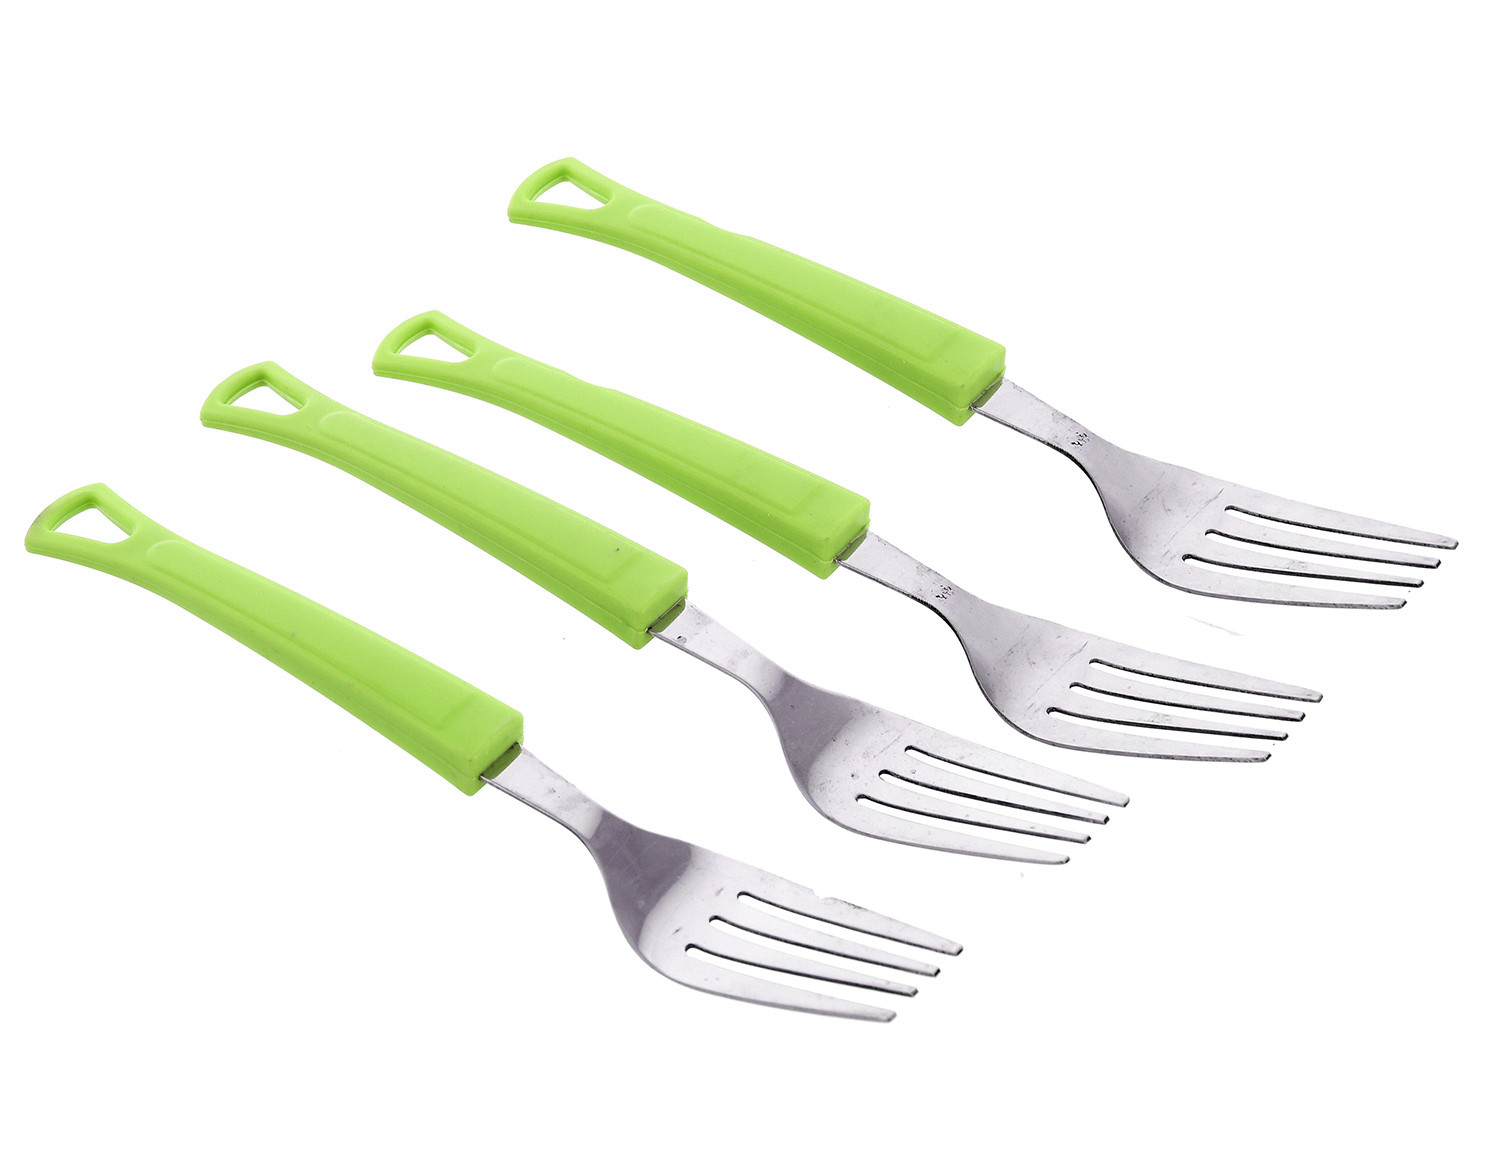 Kuber Industries Swastic Cutlery Set 24 pcs with Stand Made from Stainless Steel and ABS Plastic (Green) -CTKTC39444